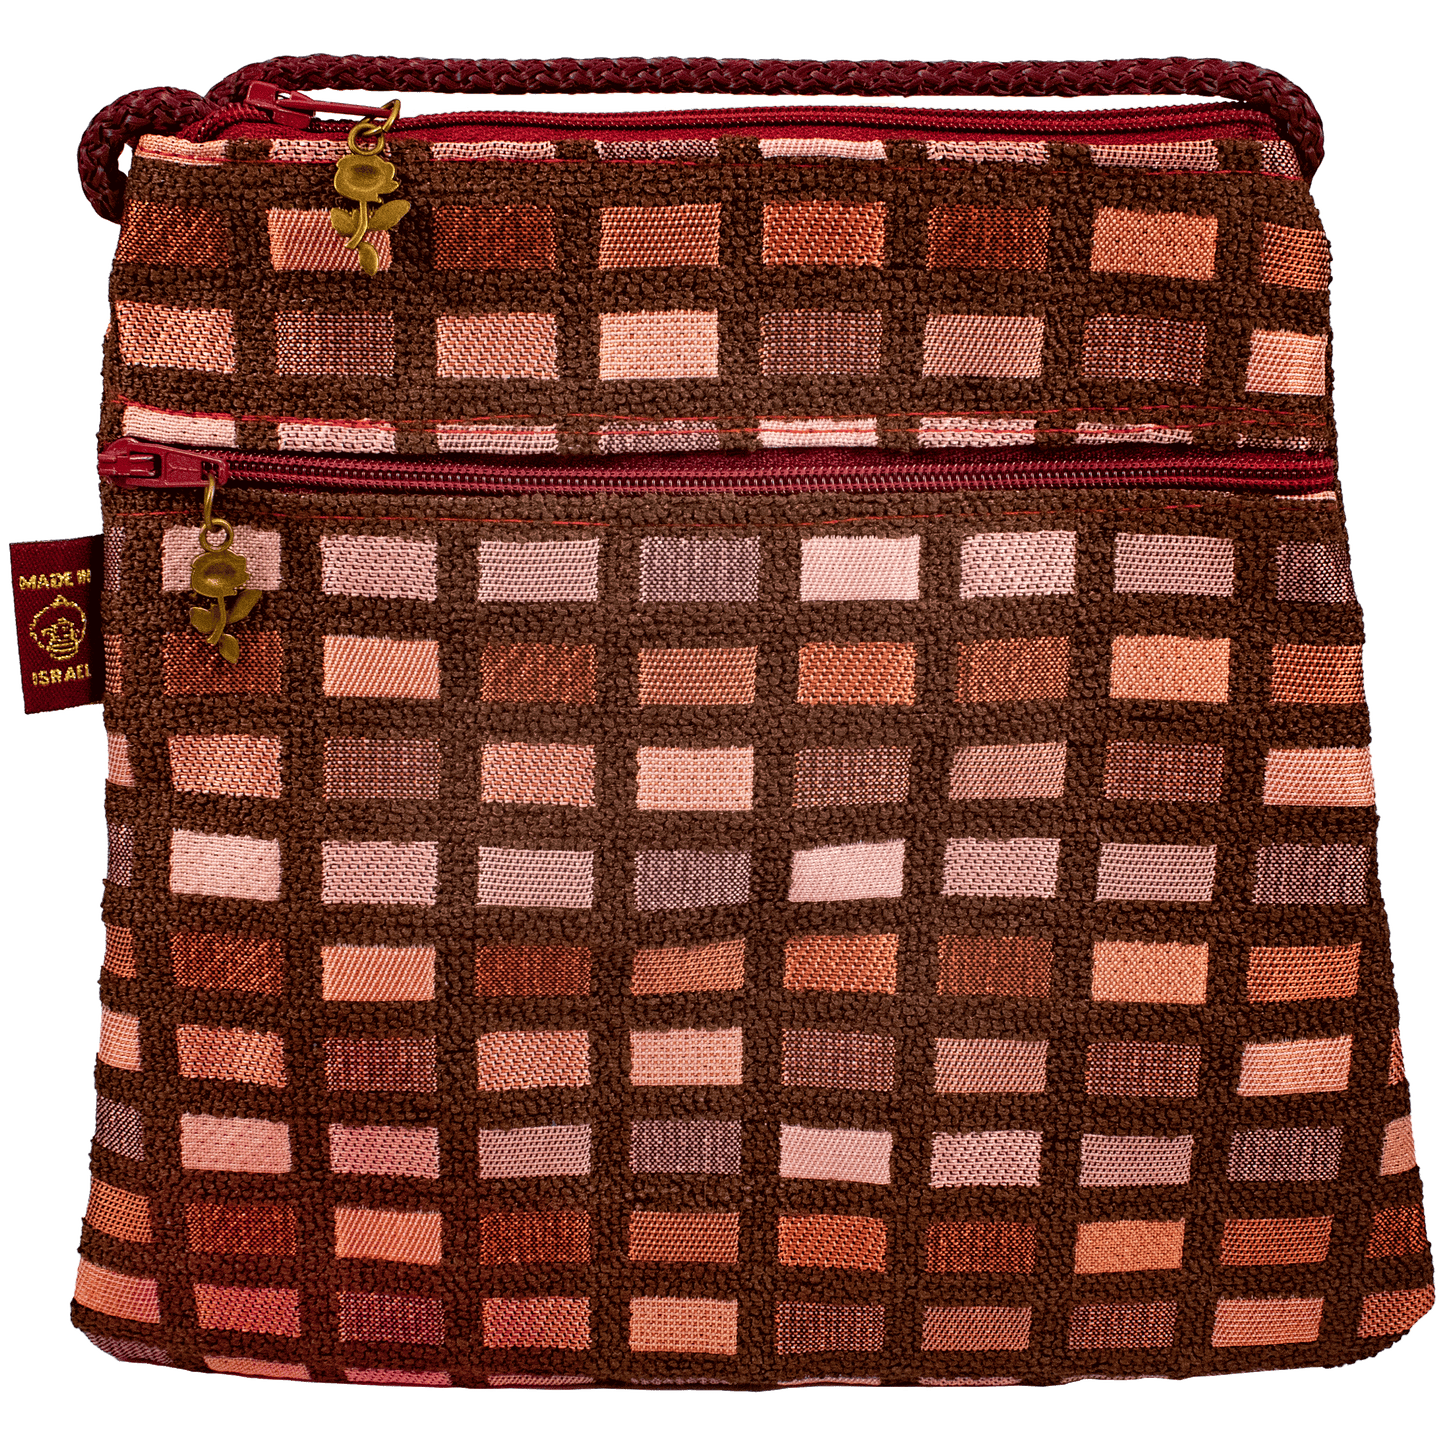 Crossbody Subtle Trapezoid Purse with maroon and blush hues tile pattern